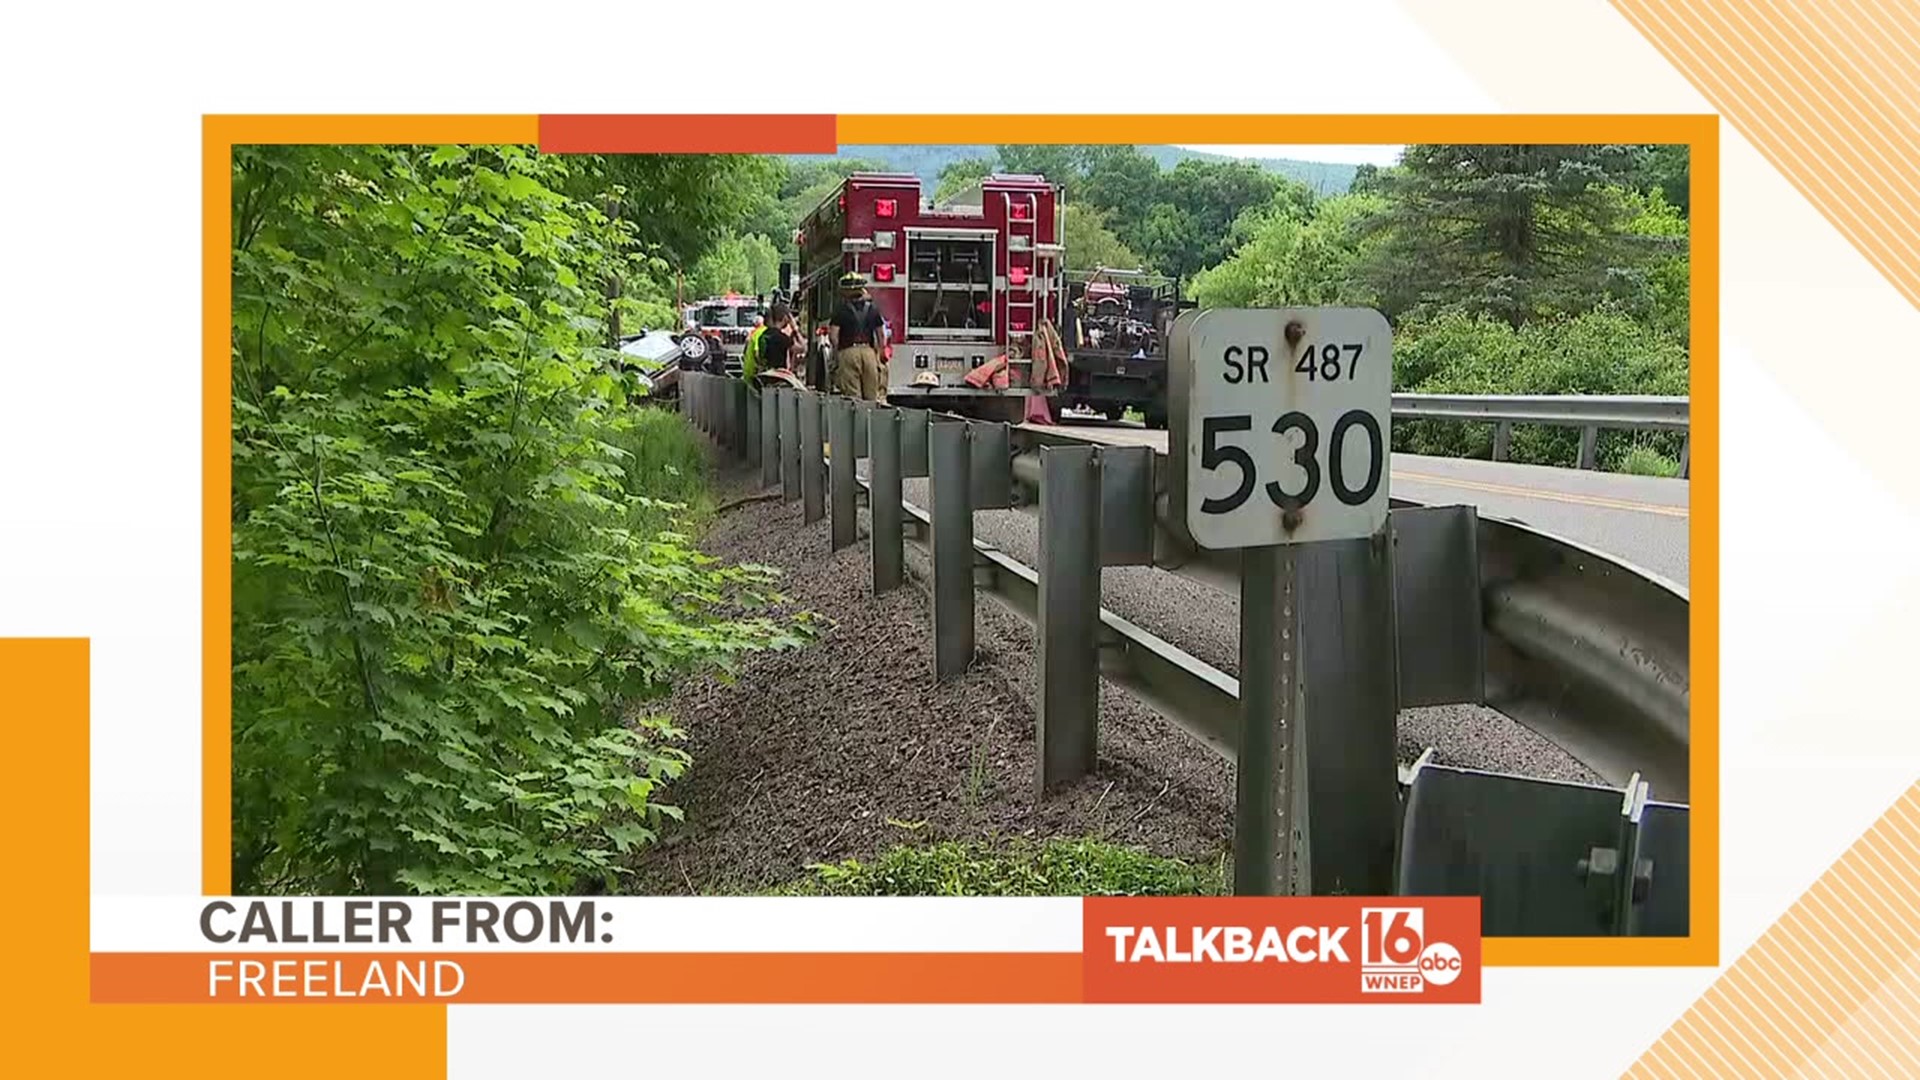 Plus a caller from Throop says that the backyard train needs help.